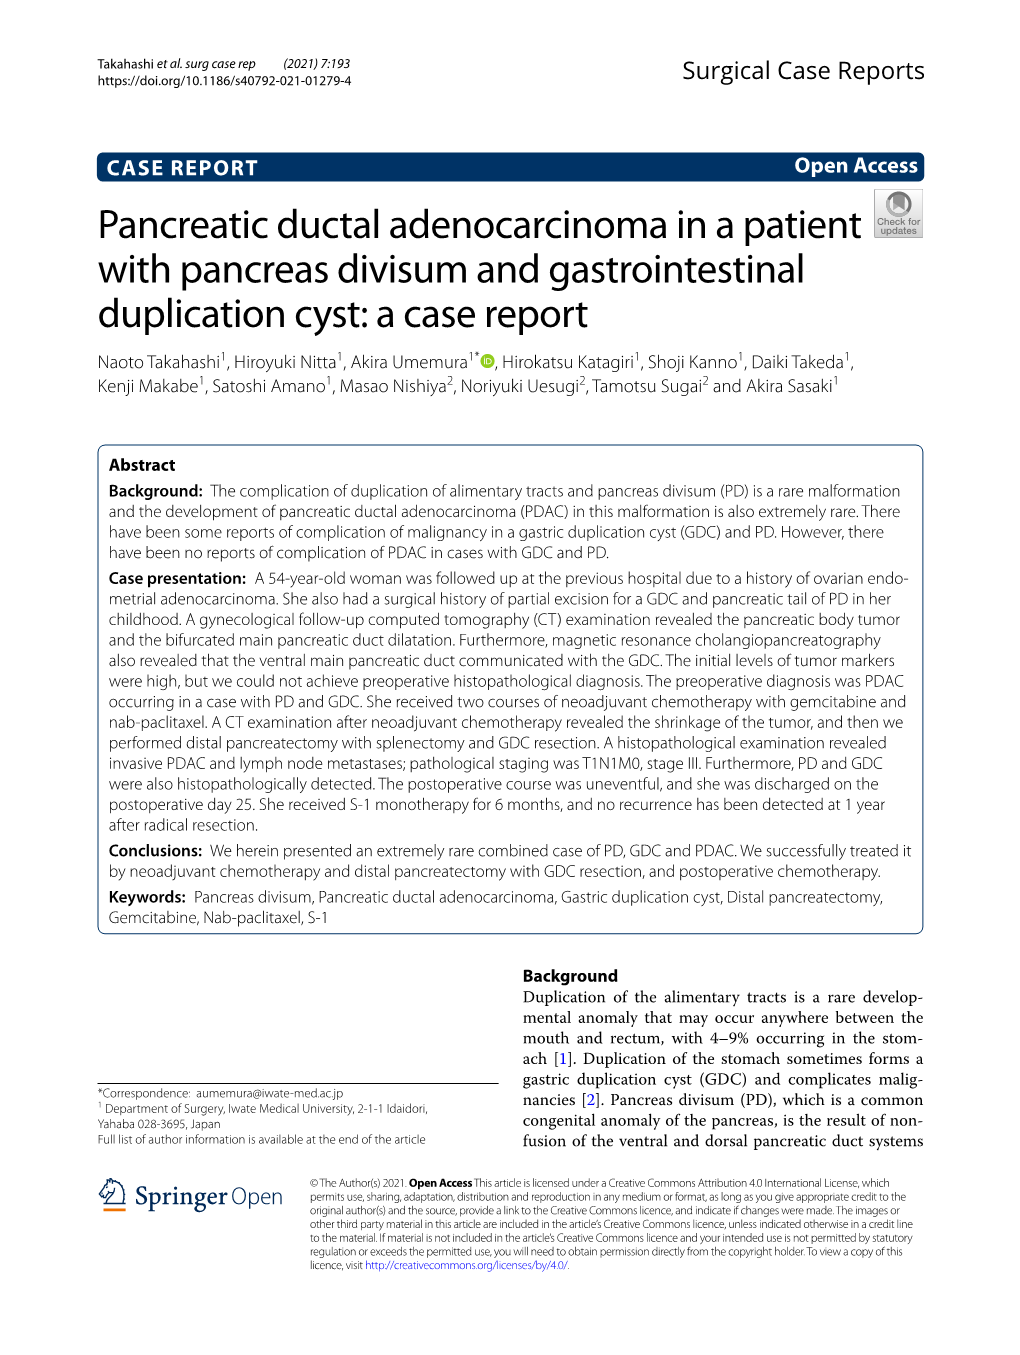 Pancreatic Ductal Adenocarcinoma in a Patient